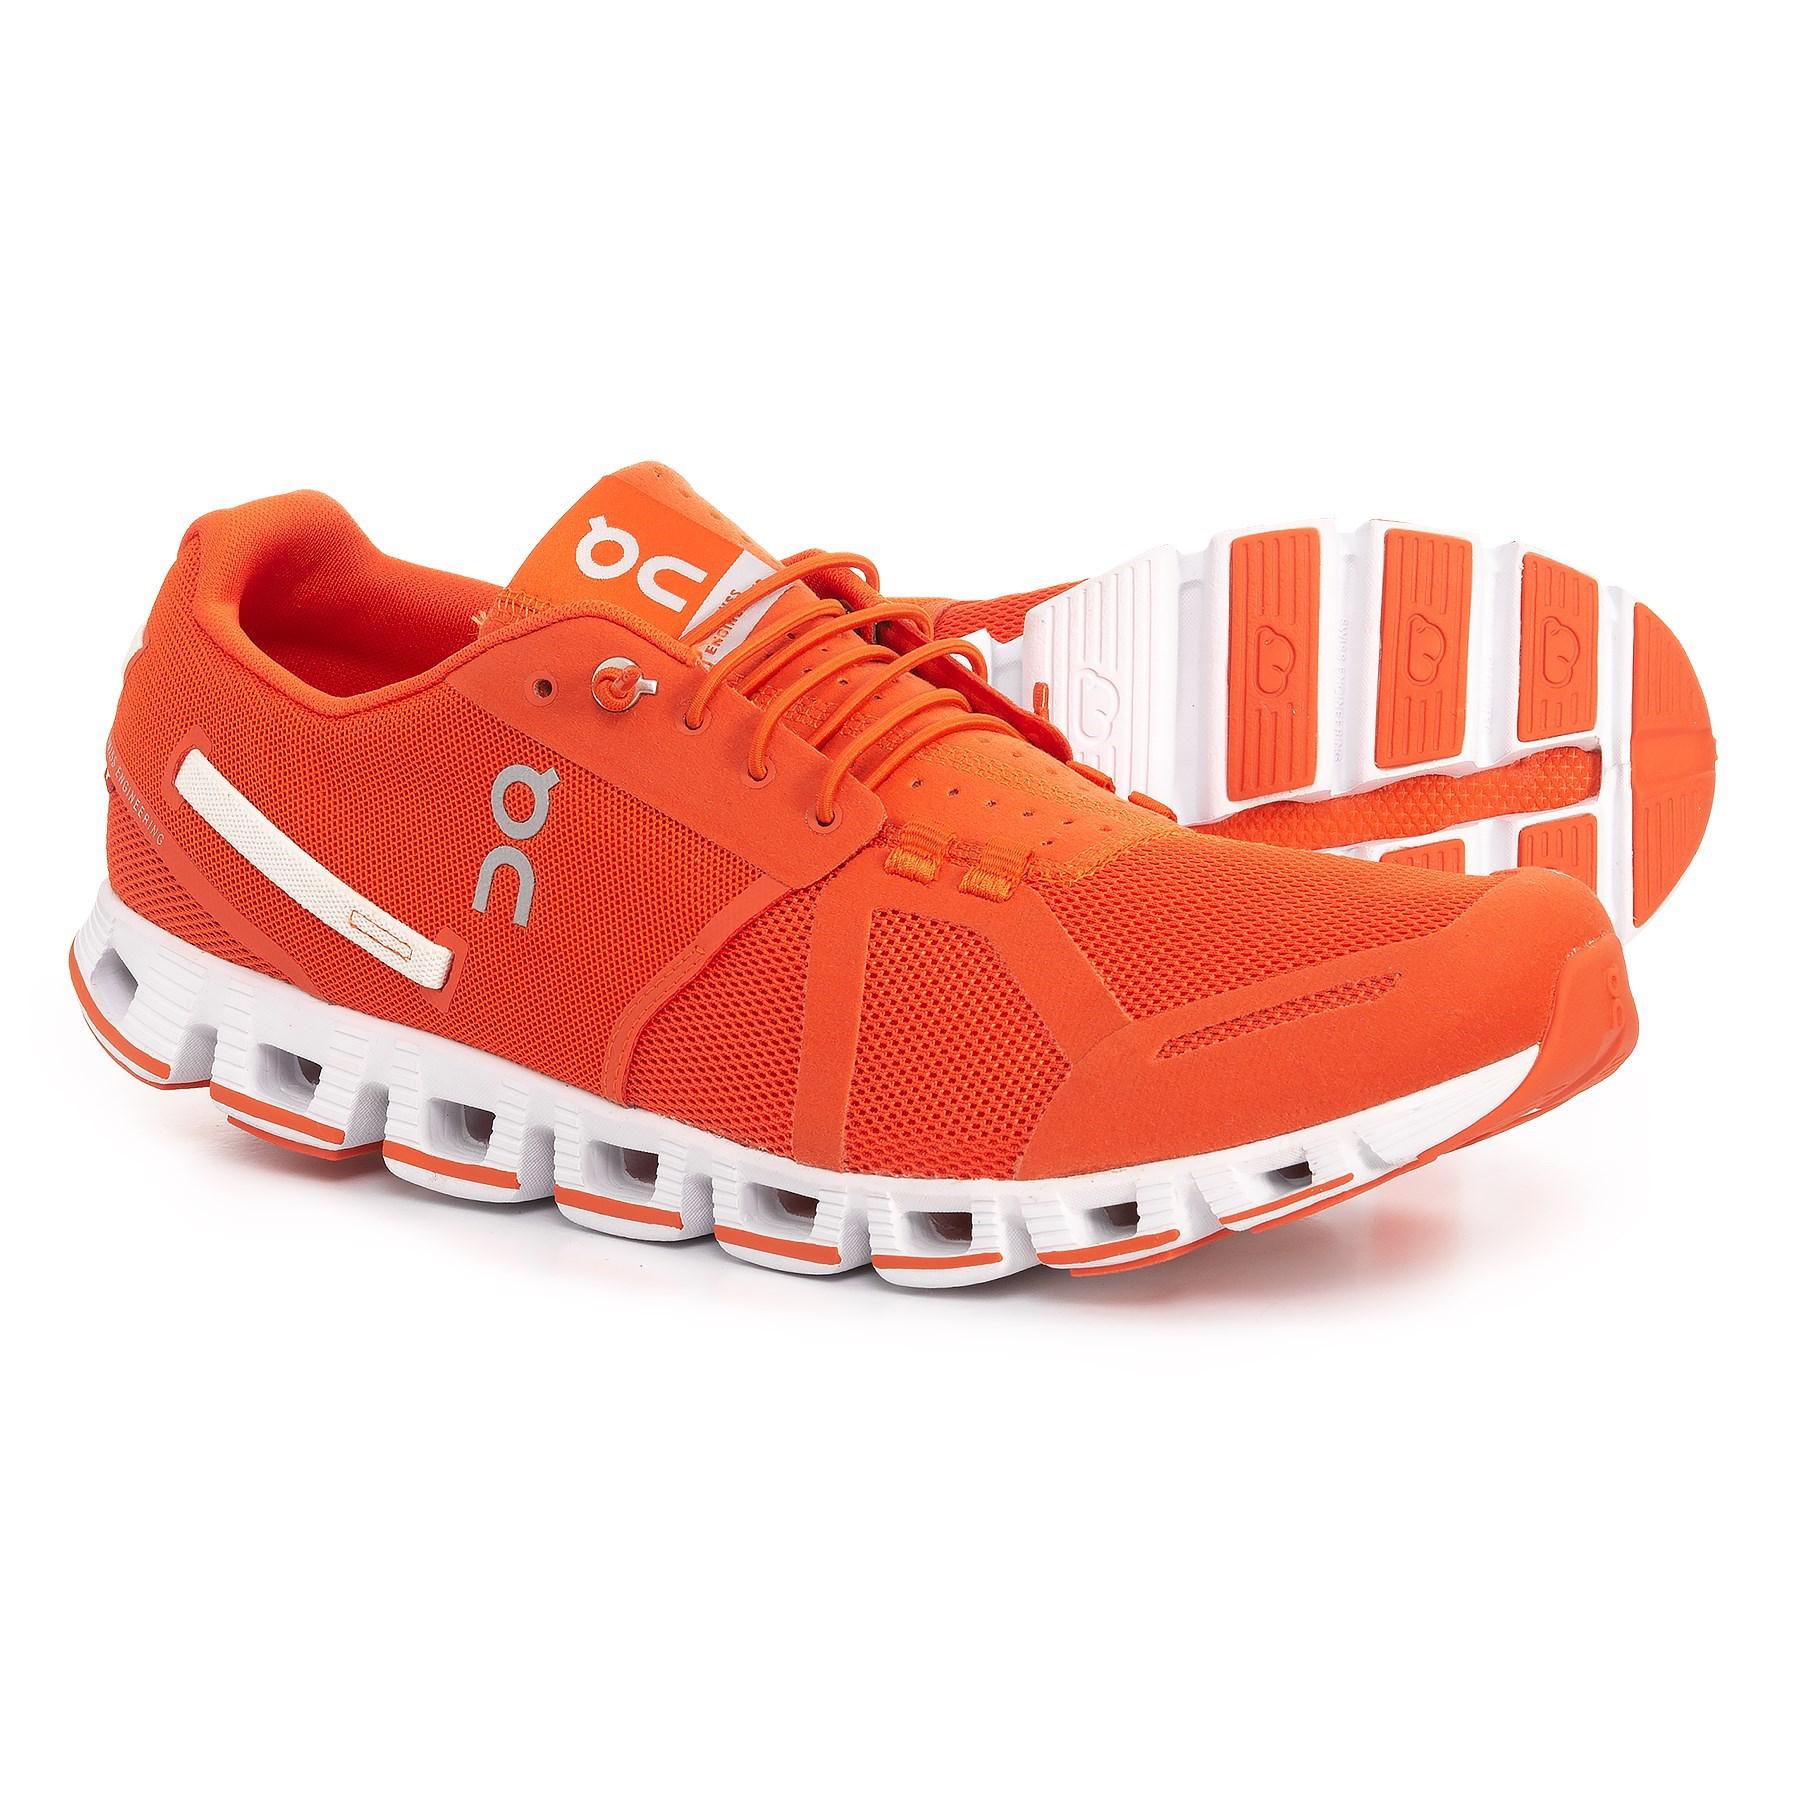 on cloud running shoes for men